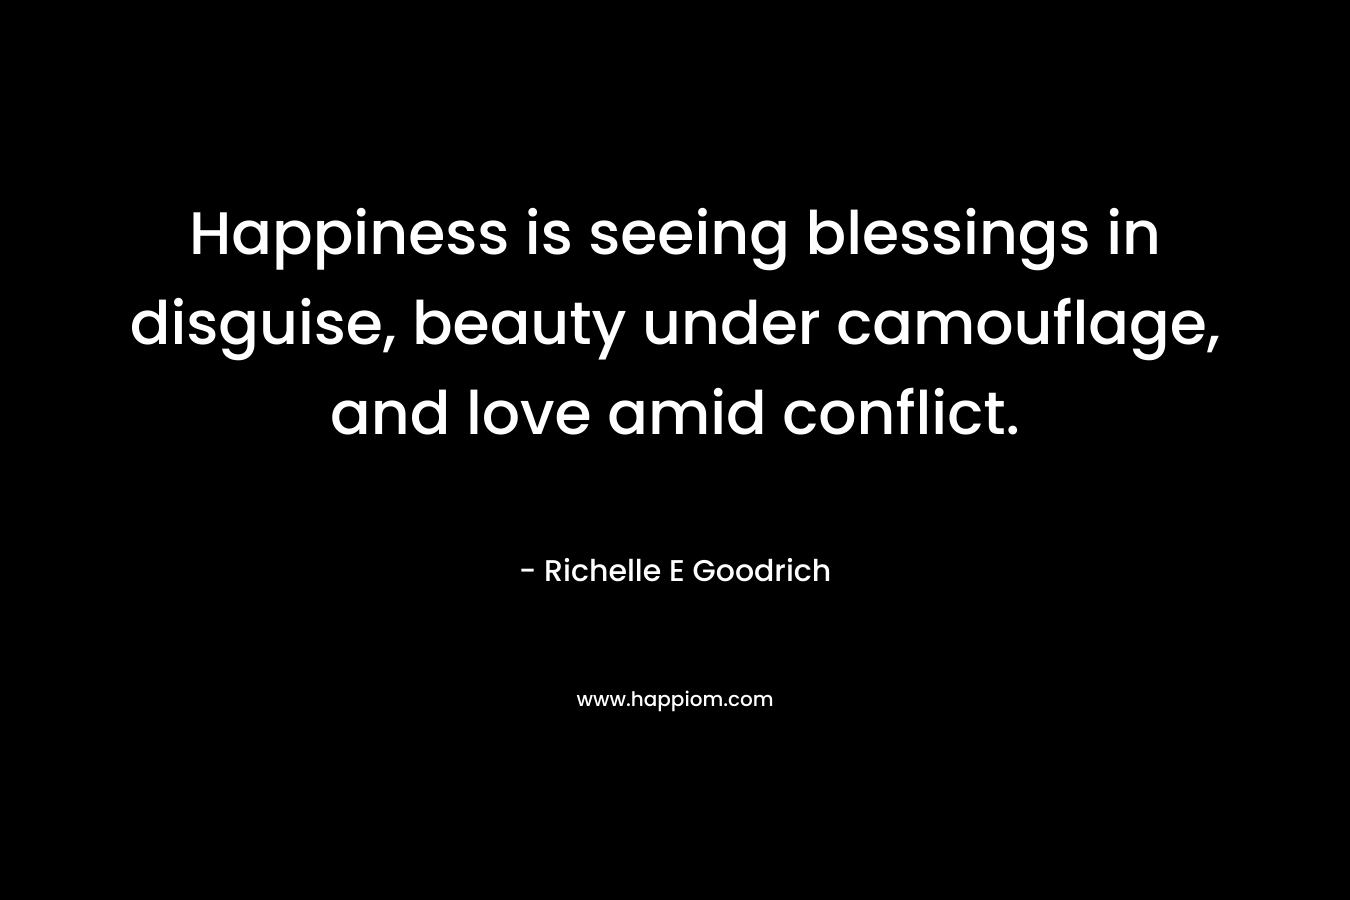 Happiness is seeing blessings in disguise, beauty under camouflage, and love amid conflict.